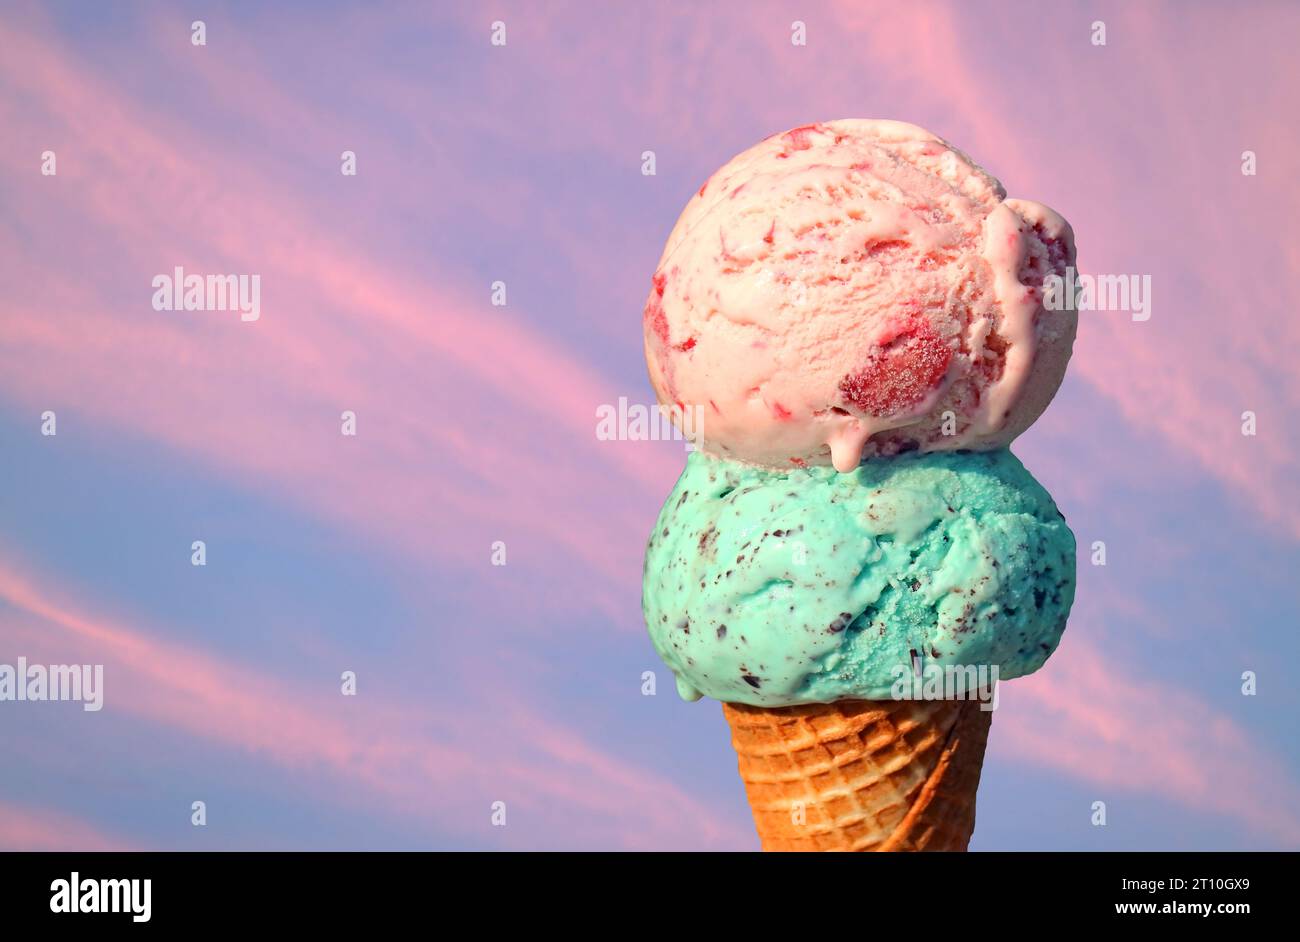 Two scoops of melting ice cream cone on pink evening sky background Stock Photo